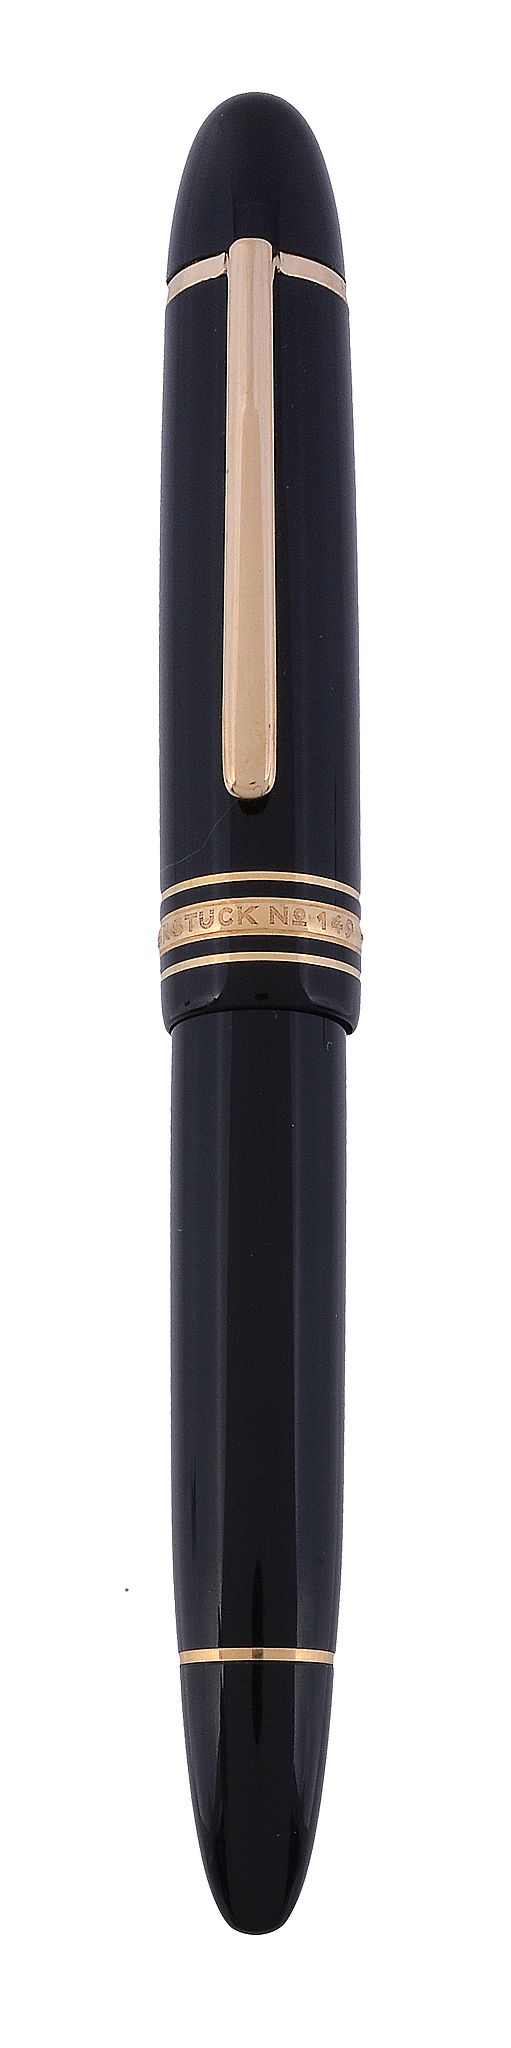 Montblanc, Meisterstuck, 149, a black fountain pen,   with a black cap and barrel, the nib stamped